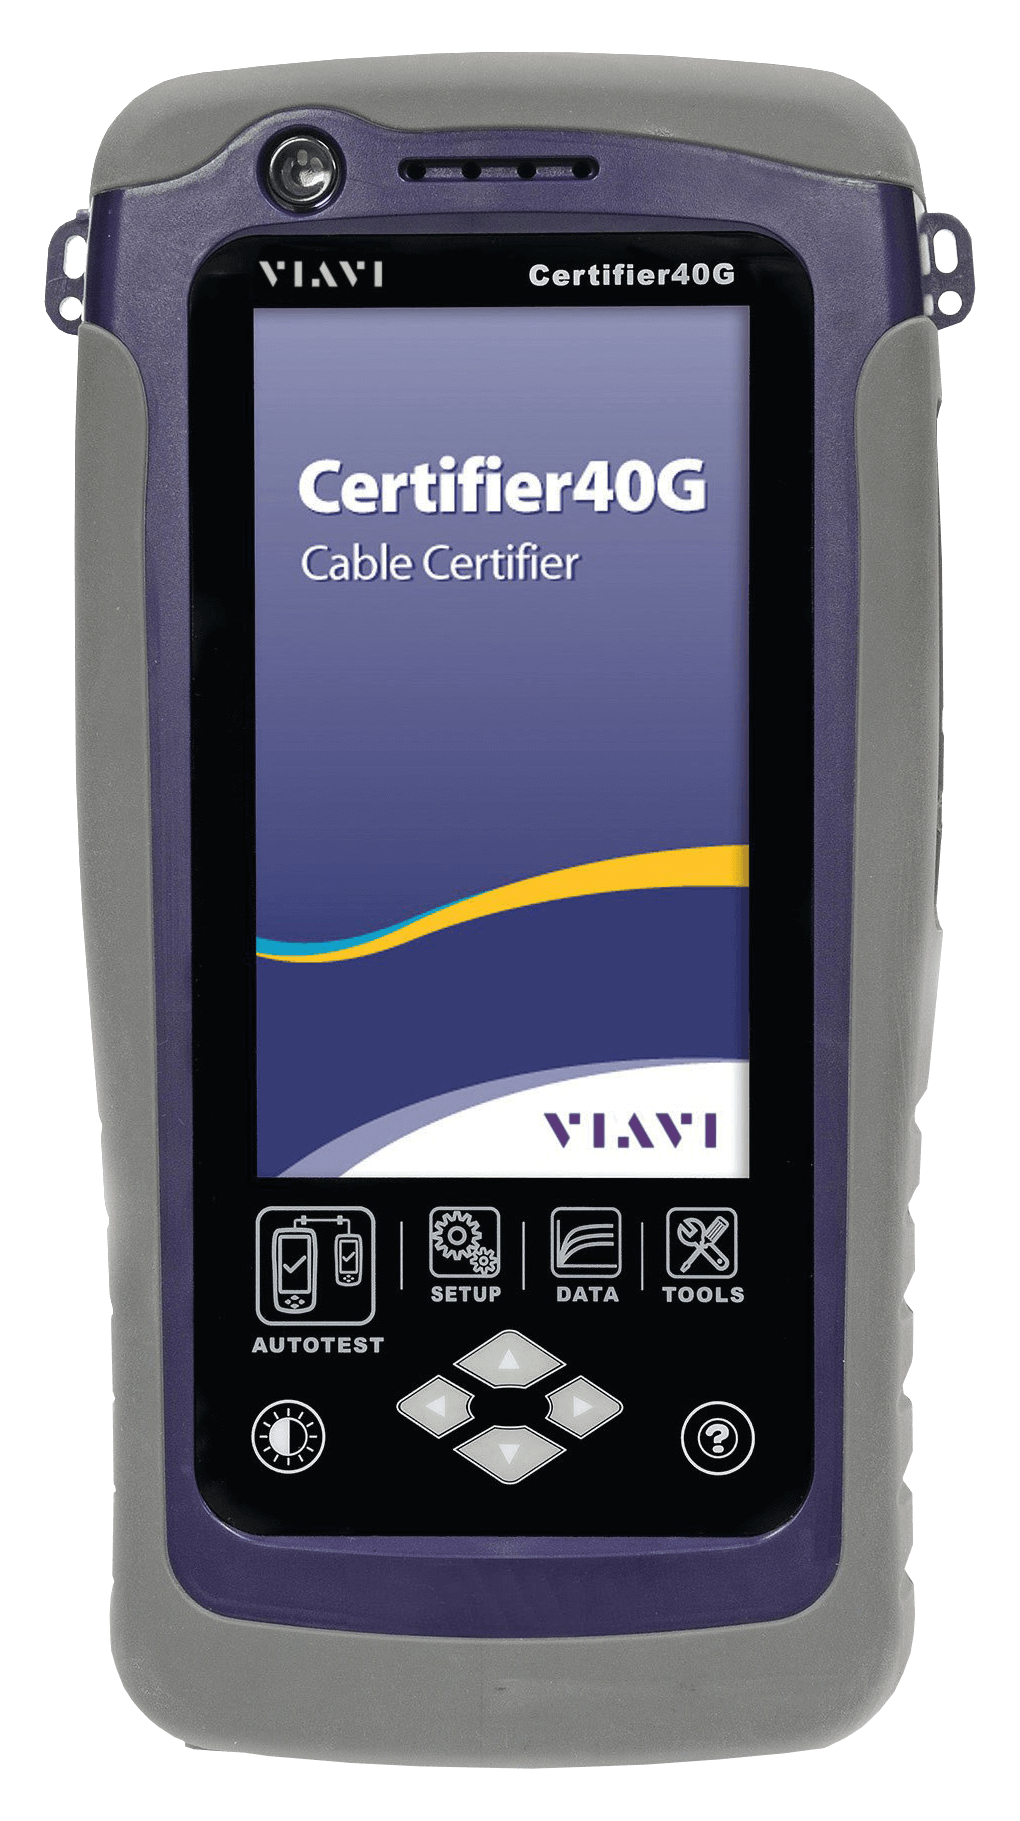 VIAVI Certifier40G Copper and Fiber Test, Certification and Analysis Device -5